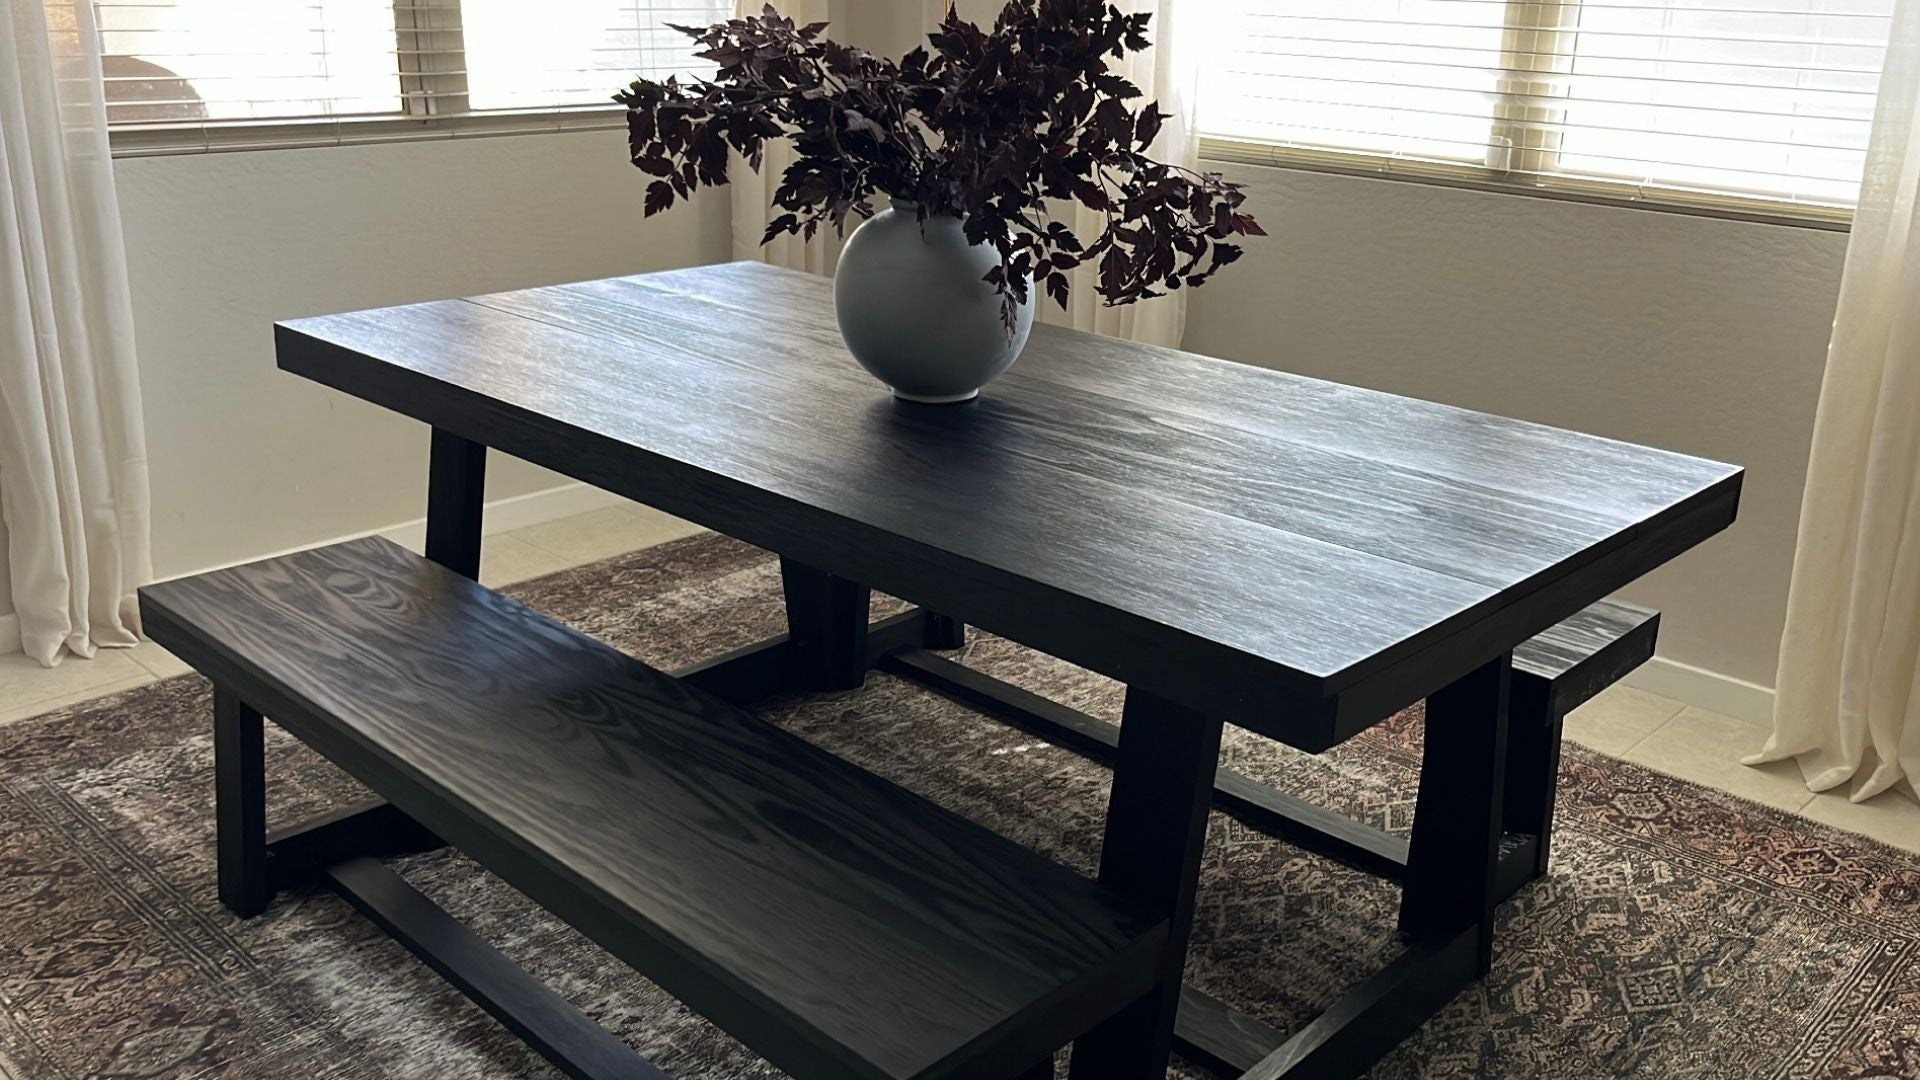 Black Dining Table Set with Two Dining Benches, Plant Centerpiece, Brown Rug, and Decor